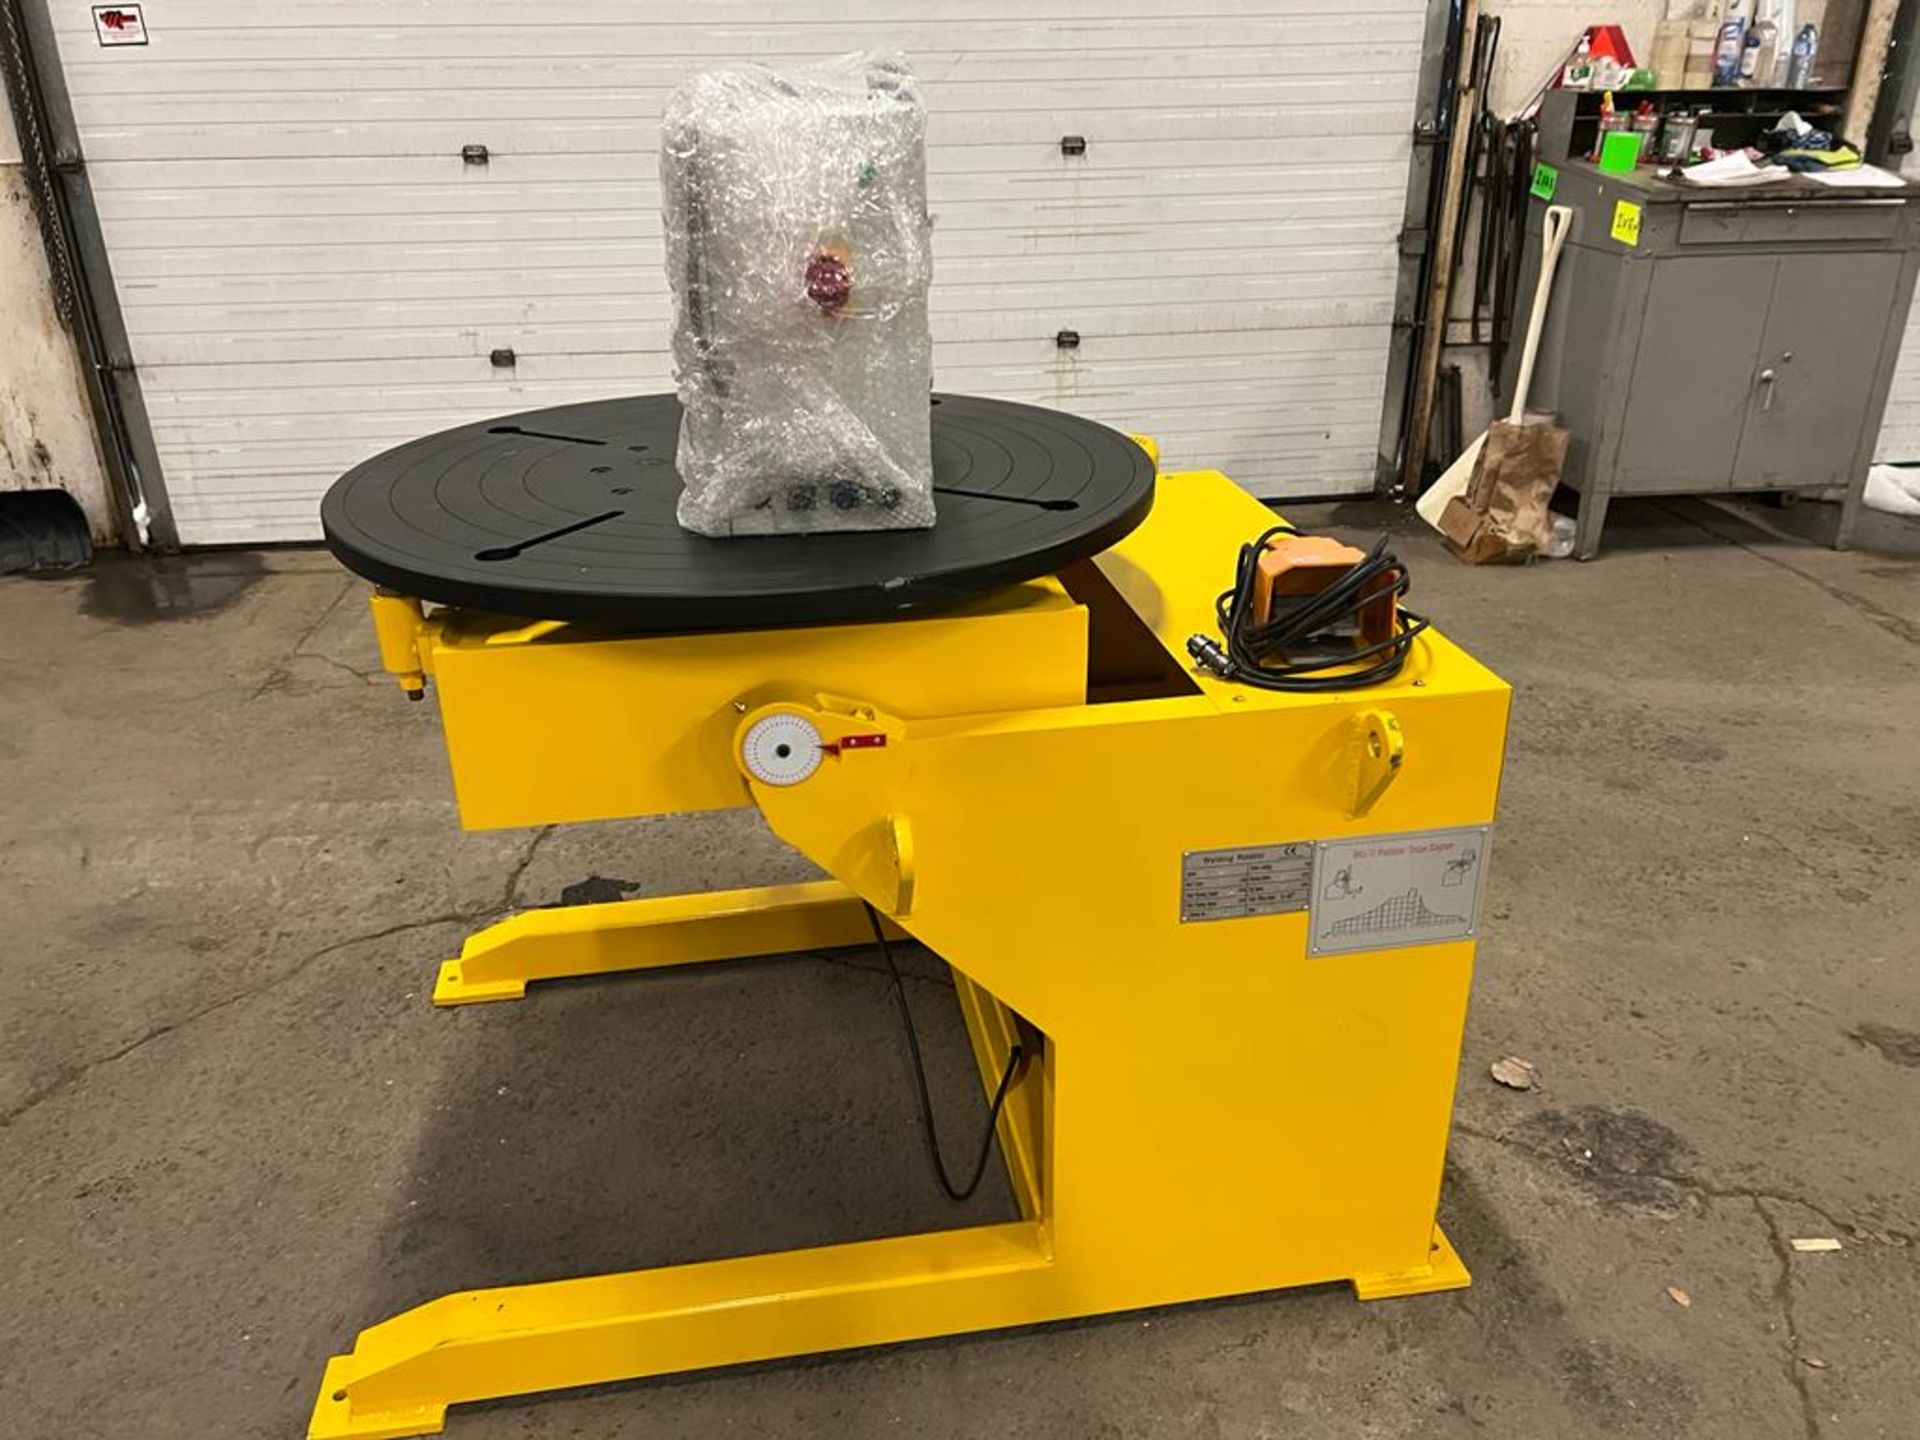 BWJ-10 WELDING POSITIONER 2200lbs 1000kg capacity - tilt and rotate with variable speed drive and